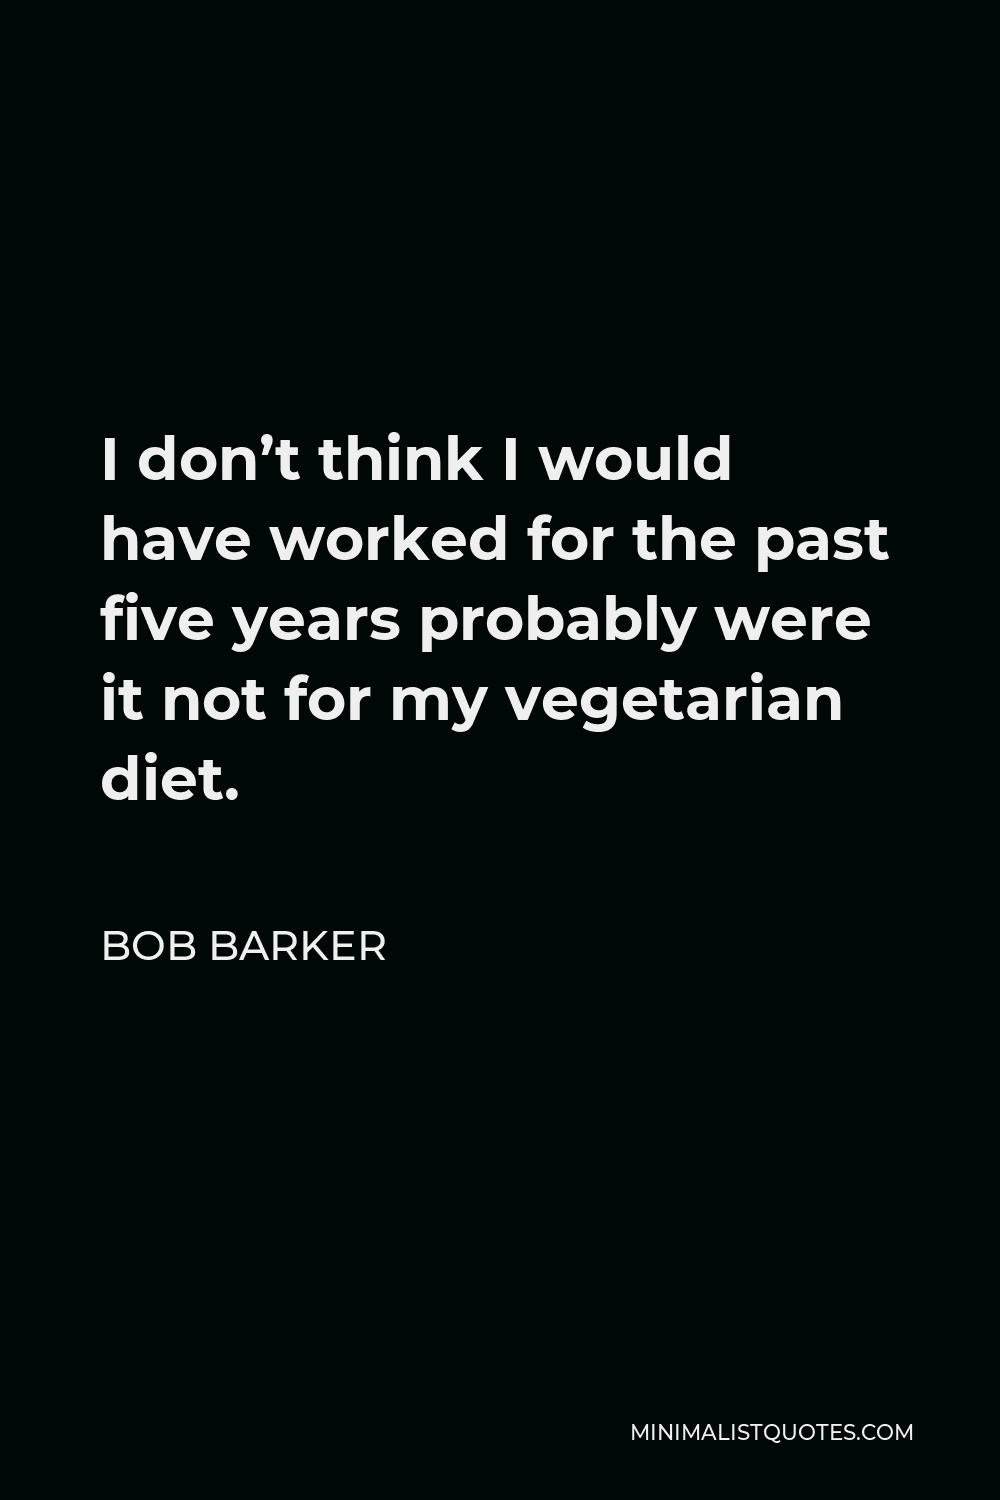 Bob Barker Quote - I don’t think I would have worked for the past five years probably were it not for my vegetarian diet.